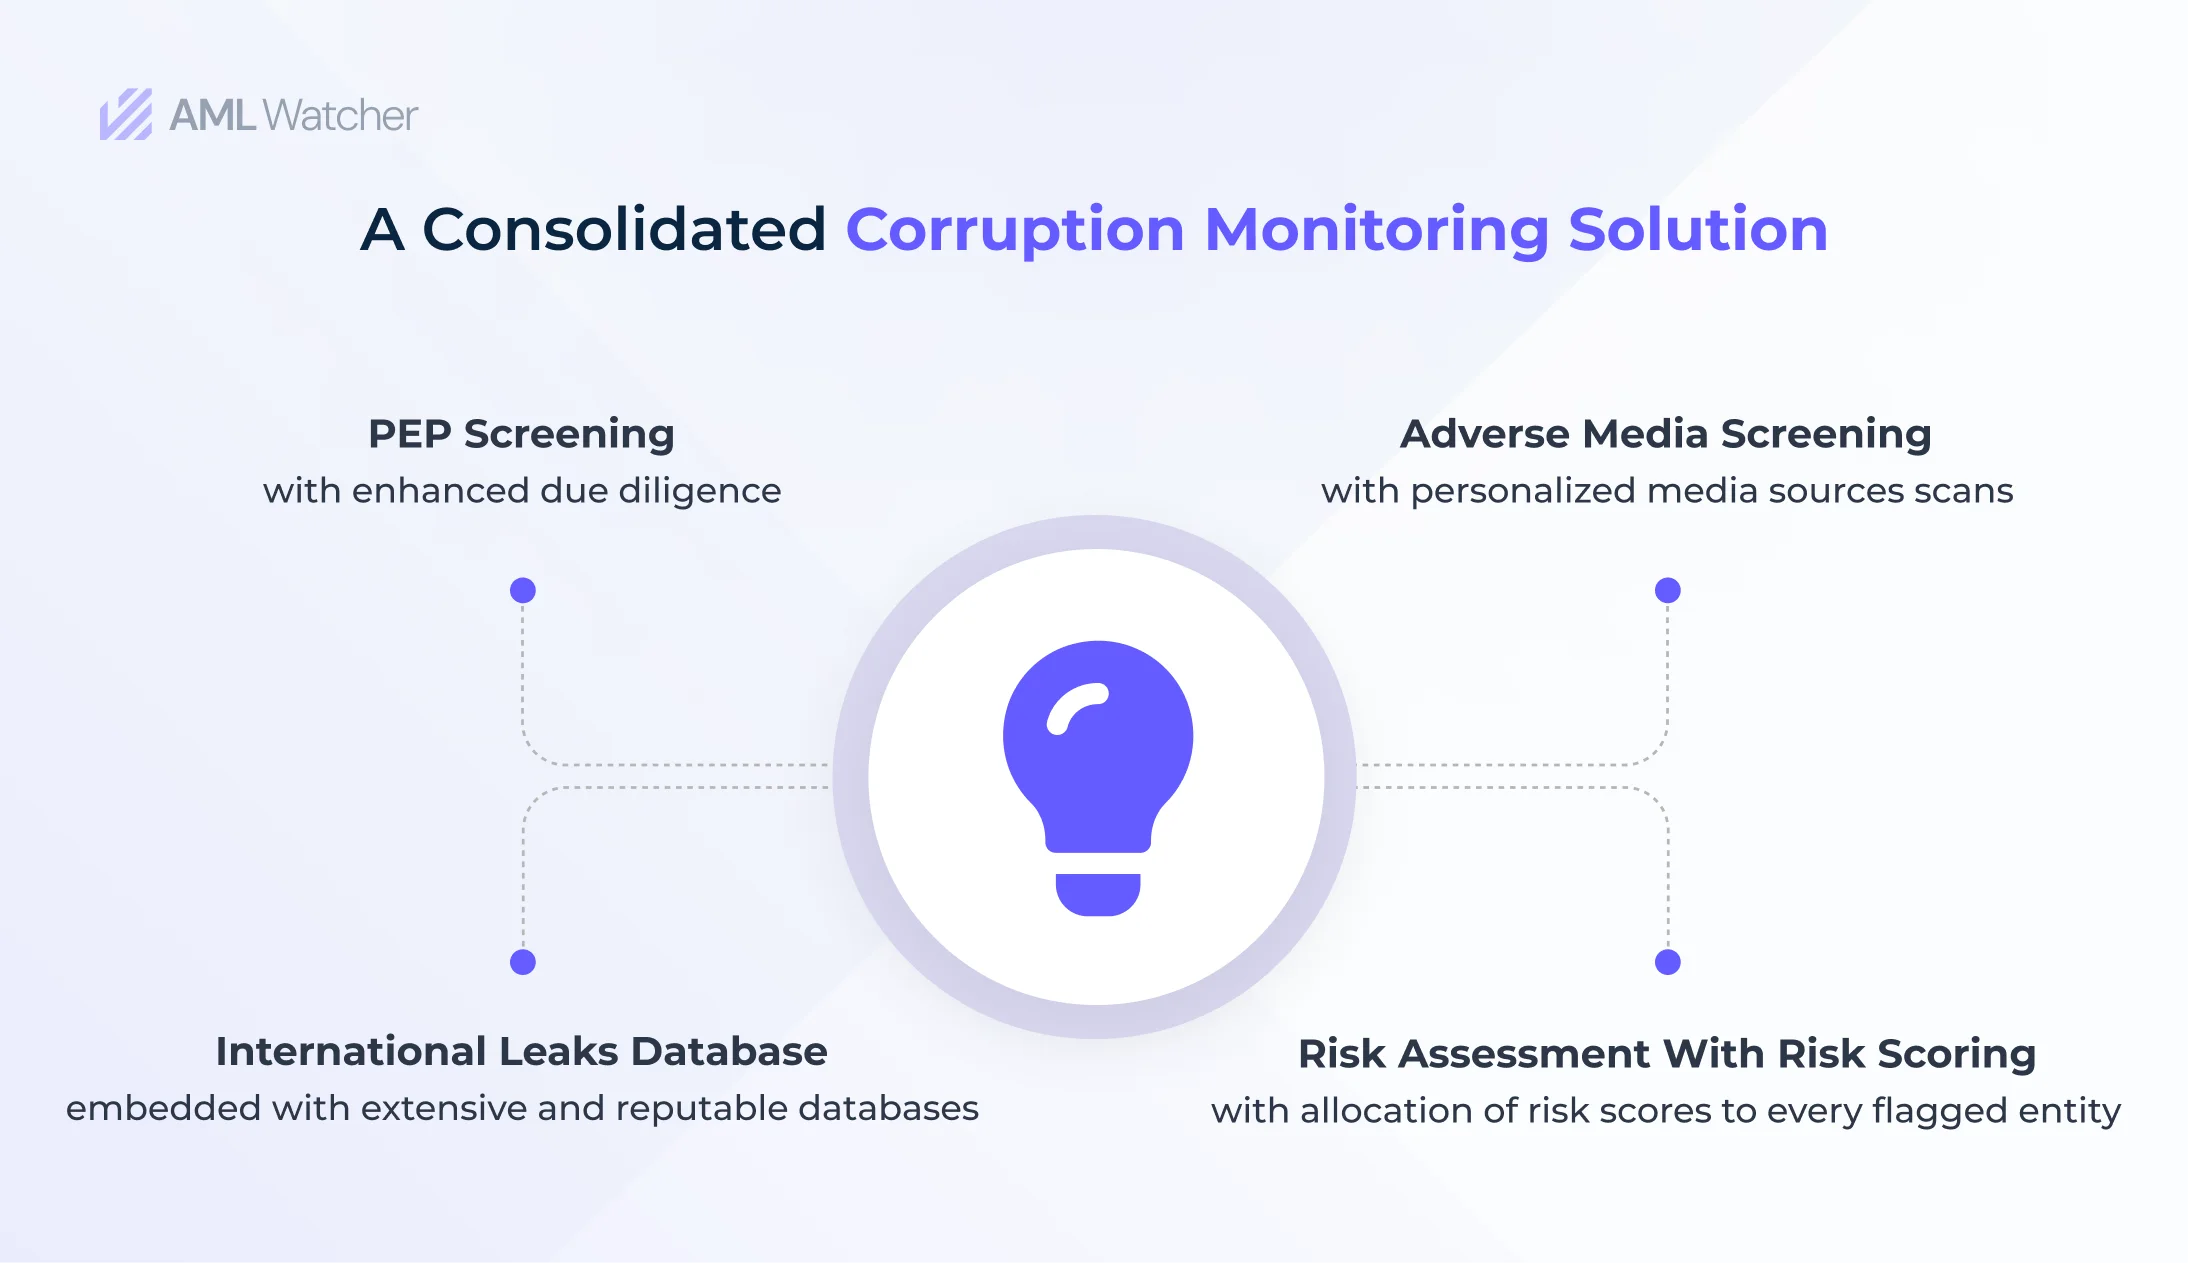 A comprehensive representation of the components of a robust corruption monitoring solution crucial to meet the gaps within a regulatory framework.